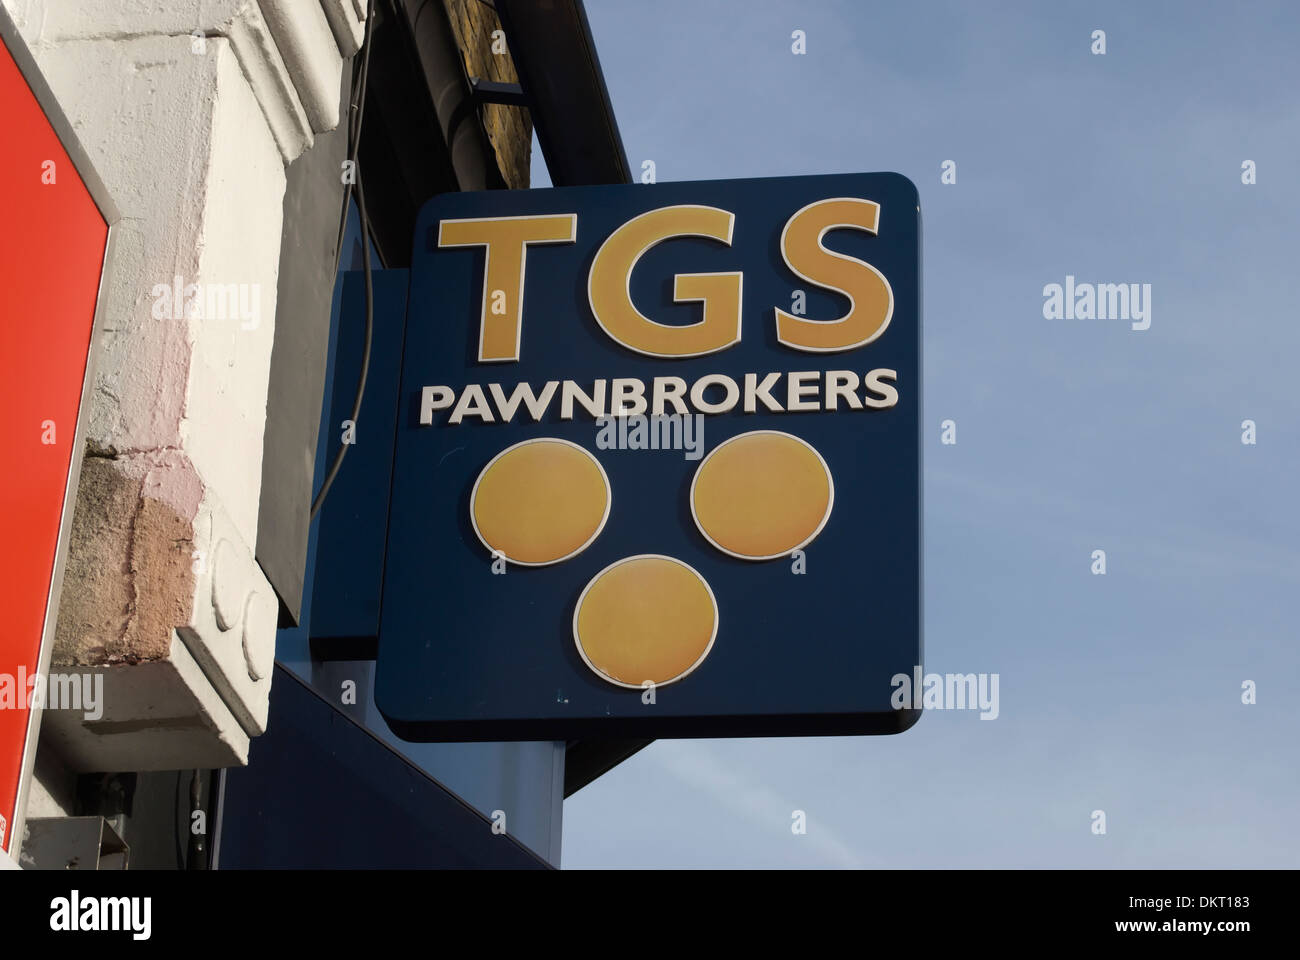 hanging sign of high street pawnbroker tgs, hounslow, middlesex, england Stock Photo